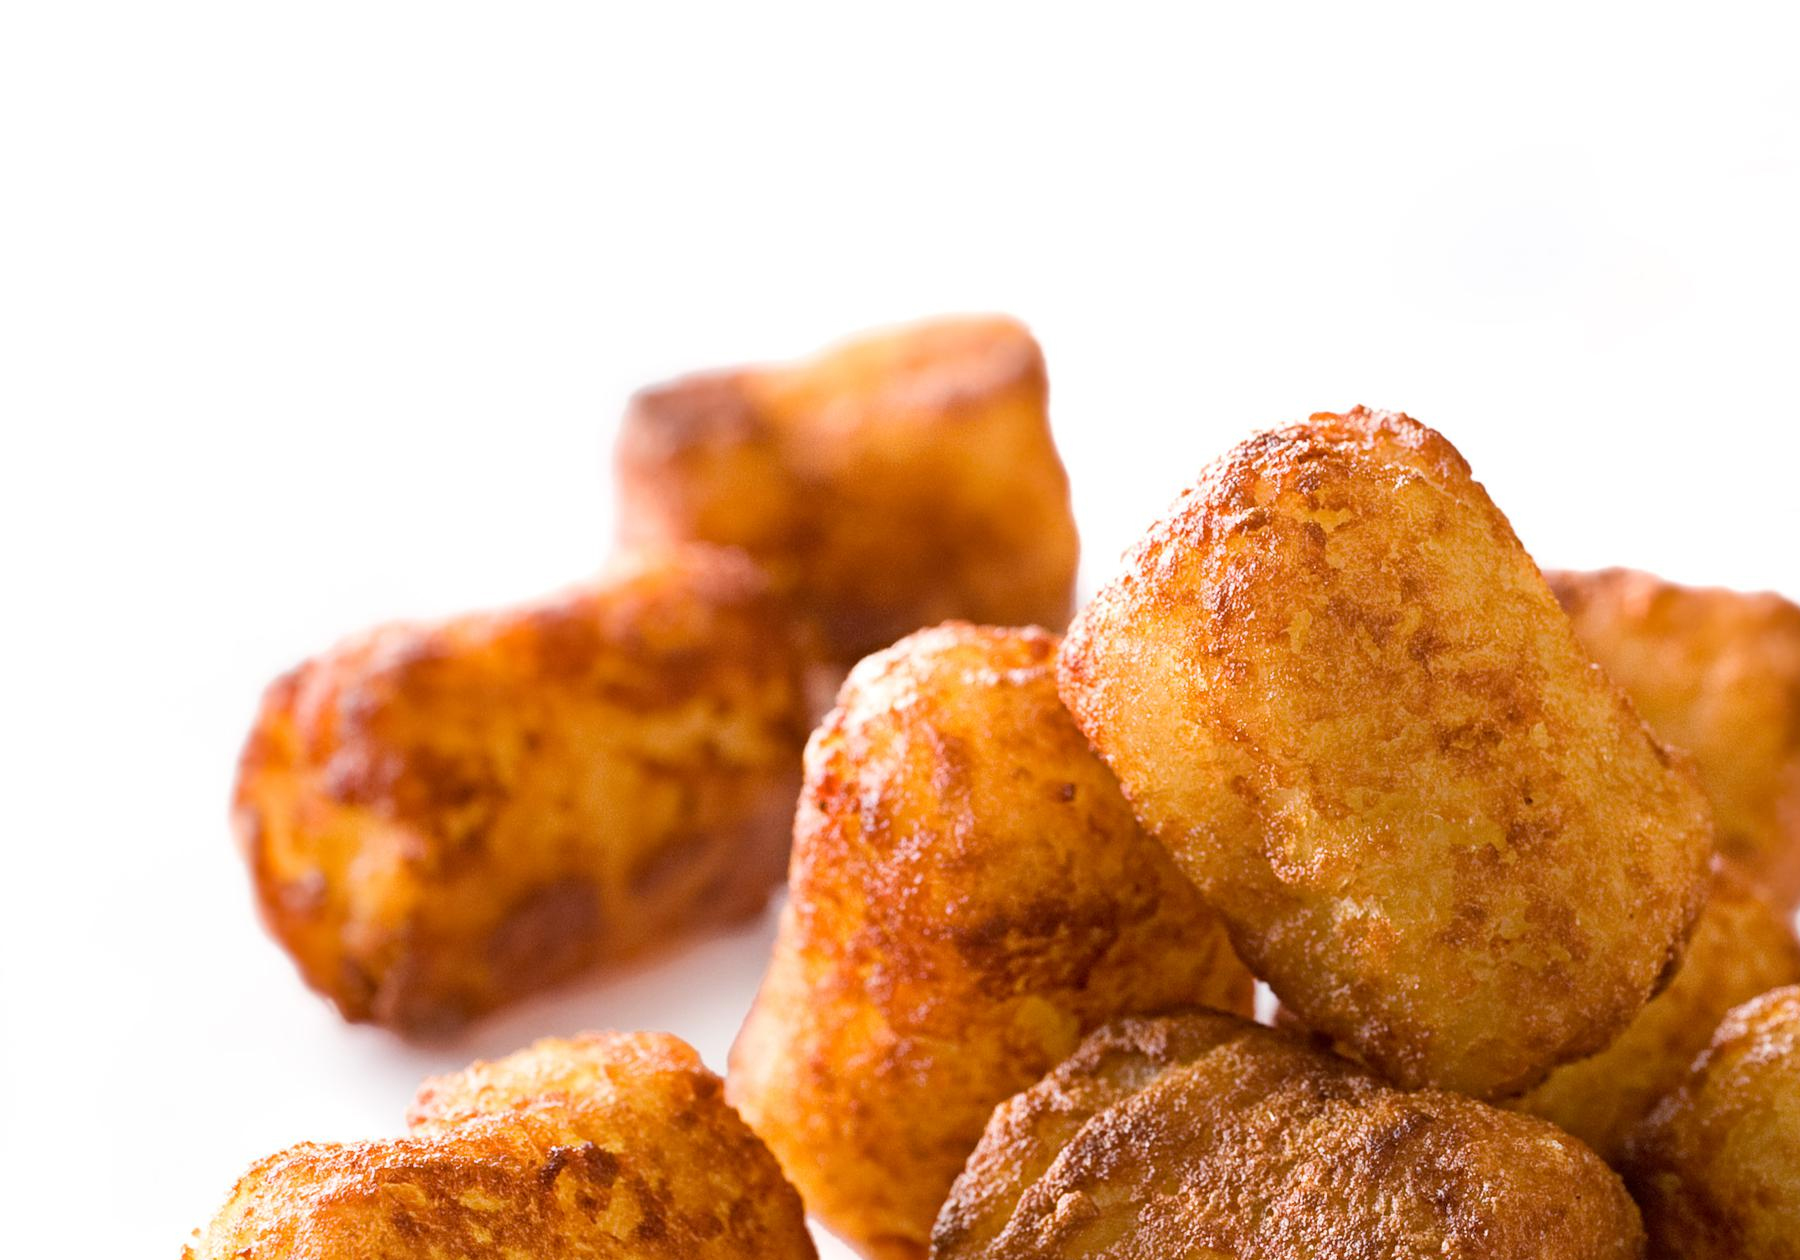 national tater tot day